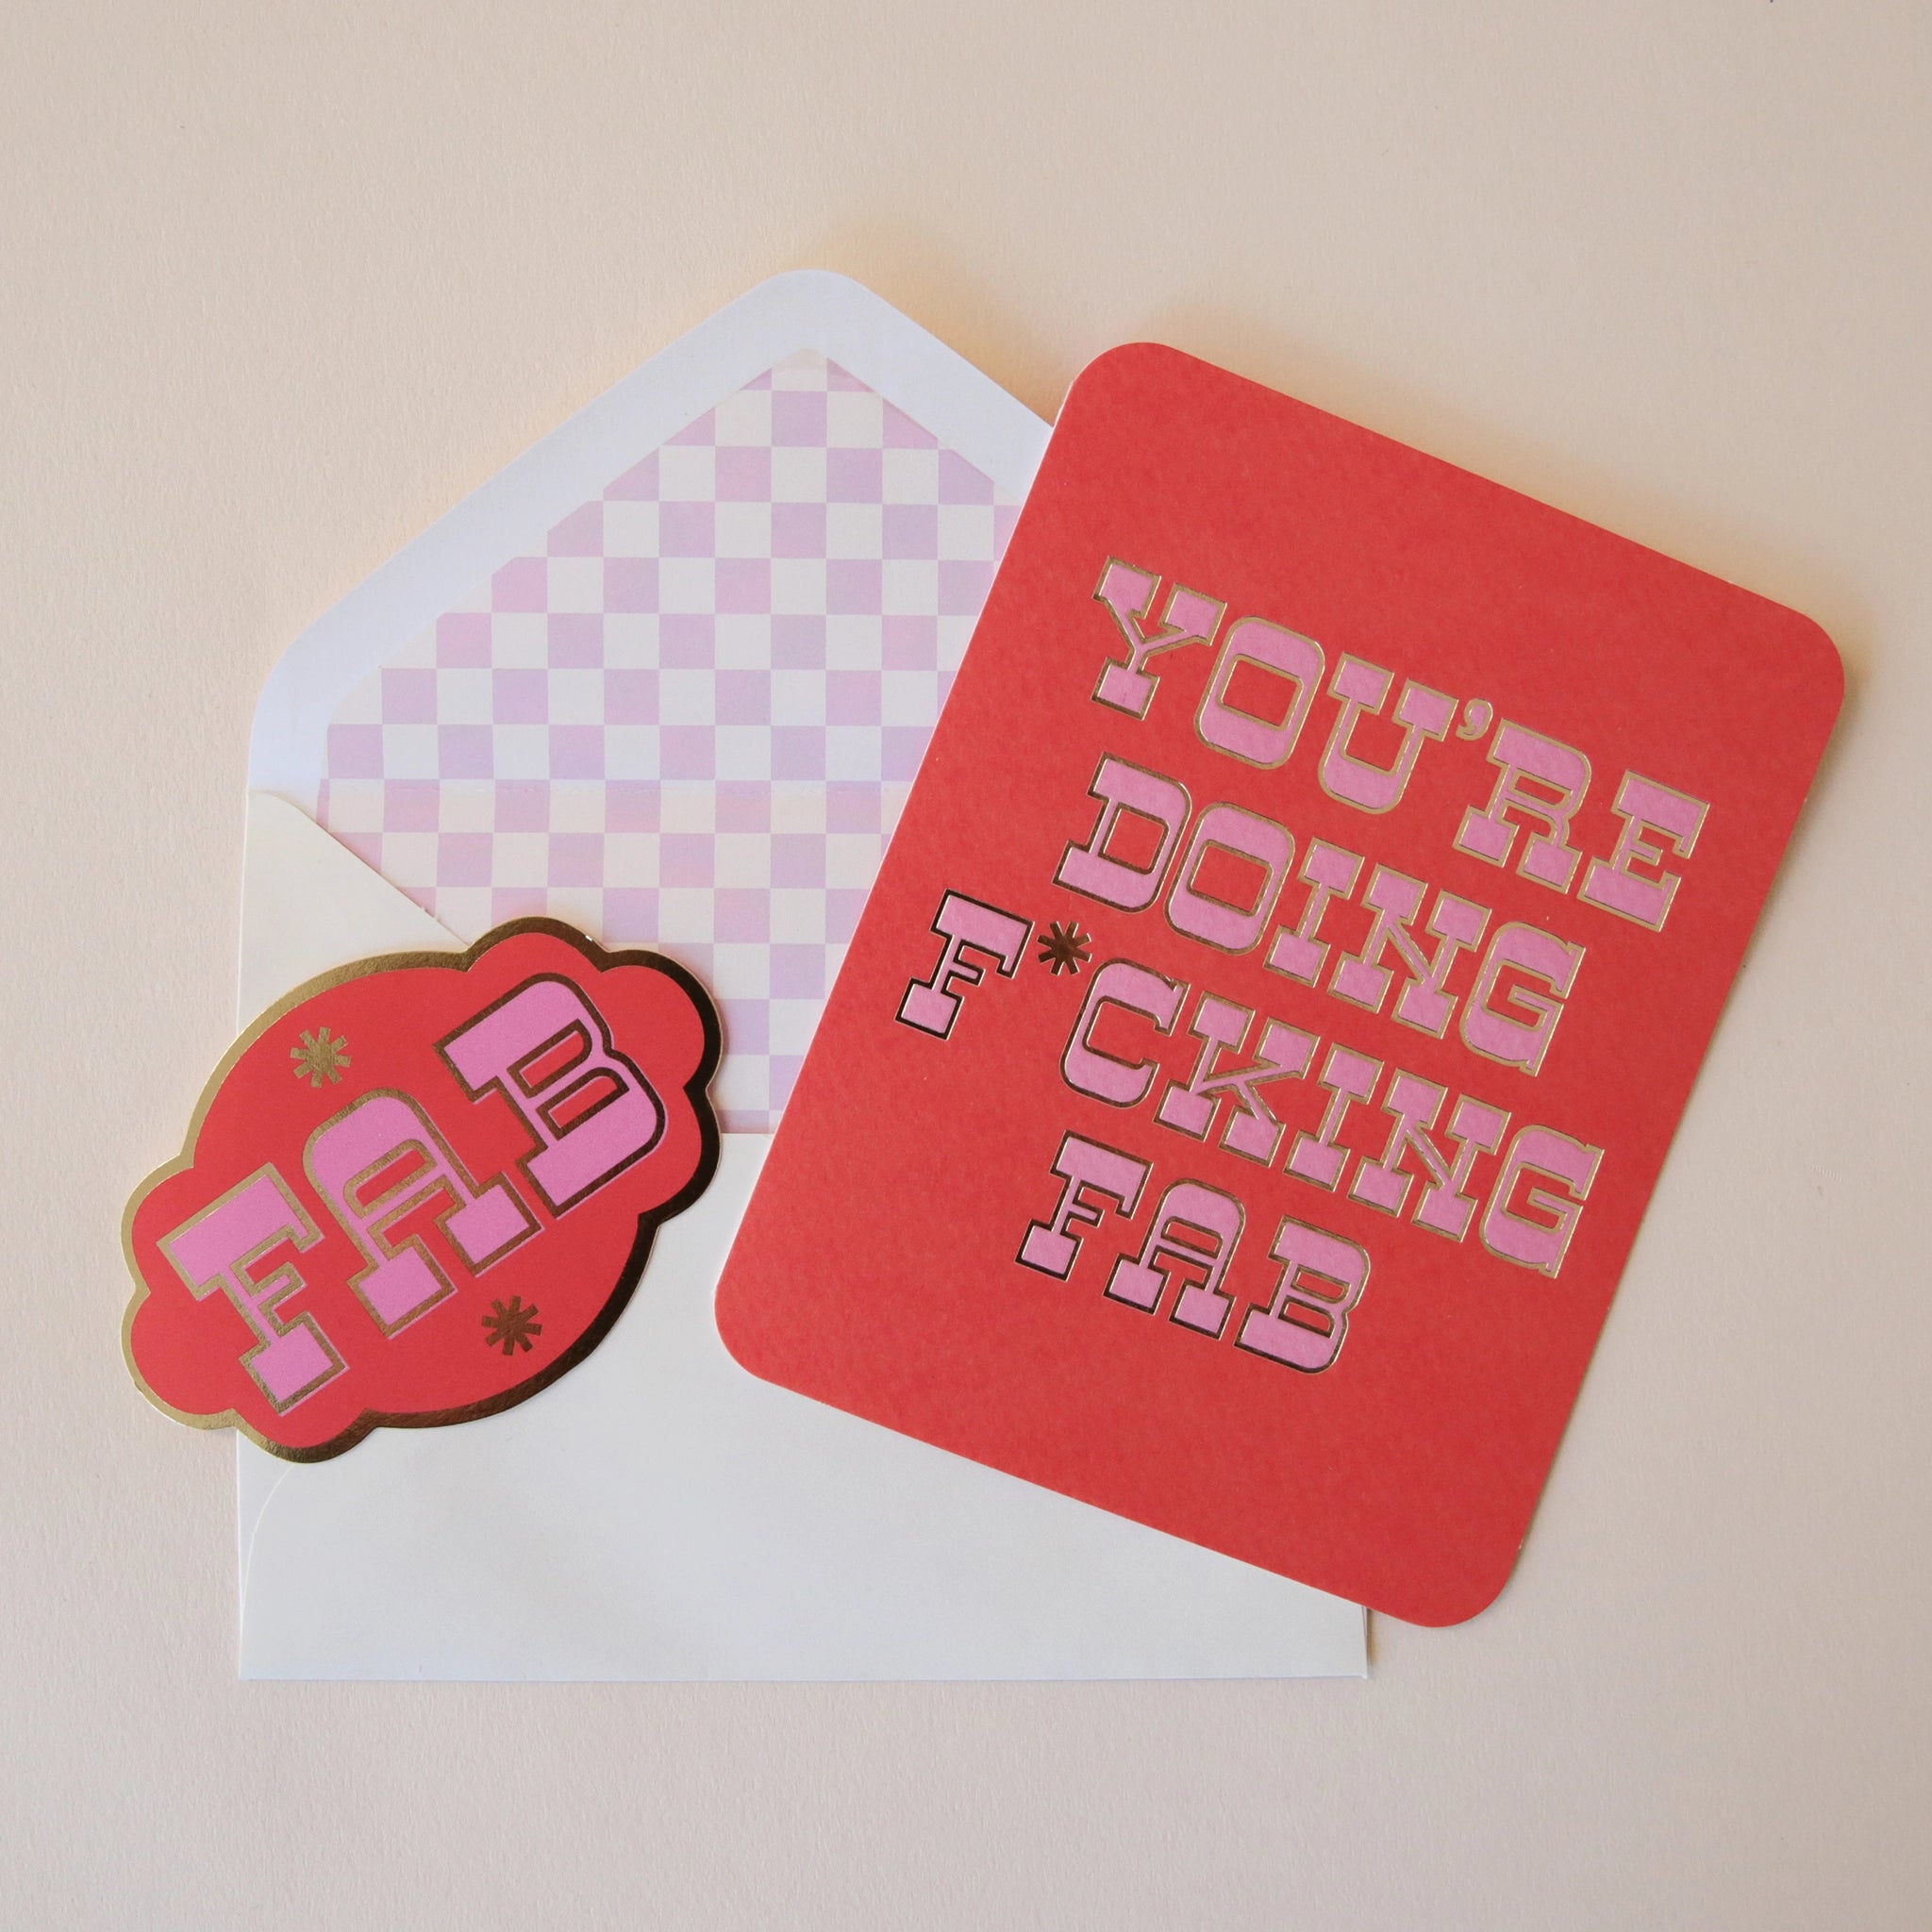 A red card with pink western style text that reads, "You're Doing F*cking Fab" along with a white envelope and a coordinating red sticker that has the same style font and says, "FAB". The interior of the white envelope has a light pink and white checker design.